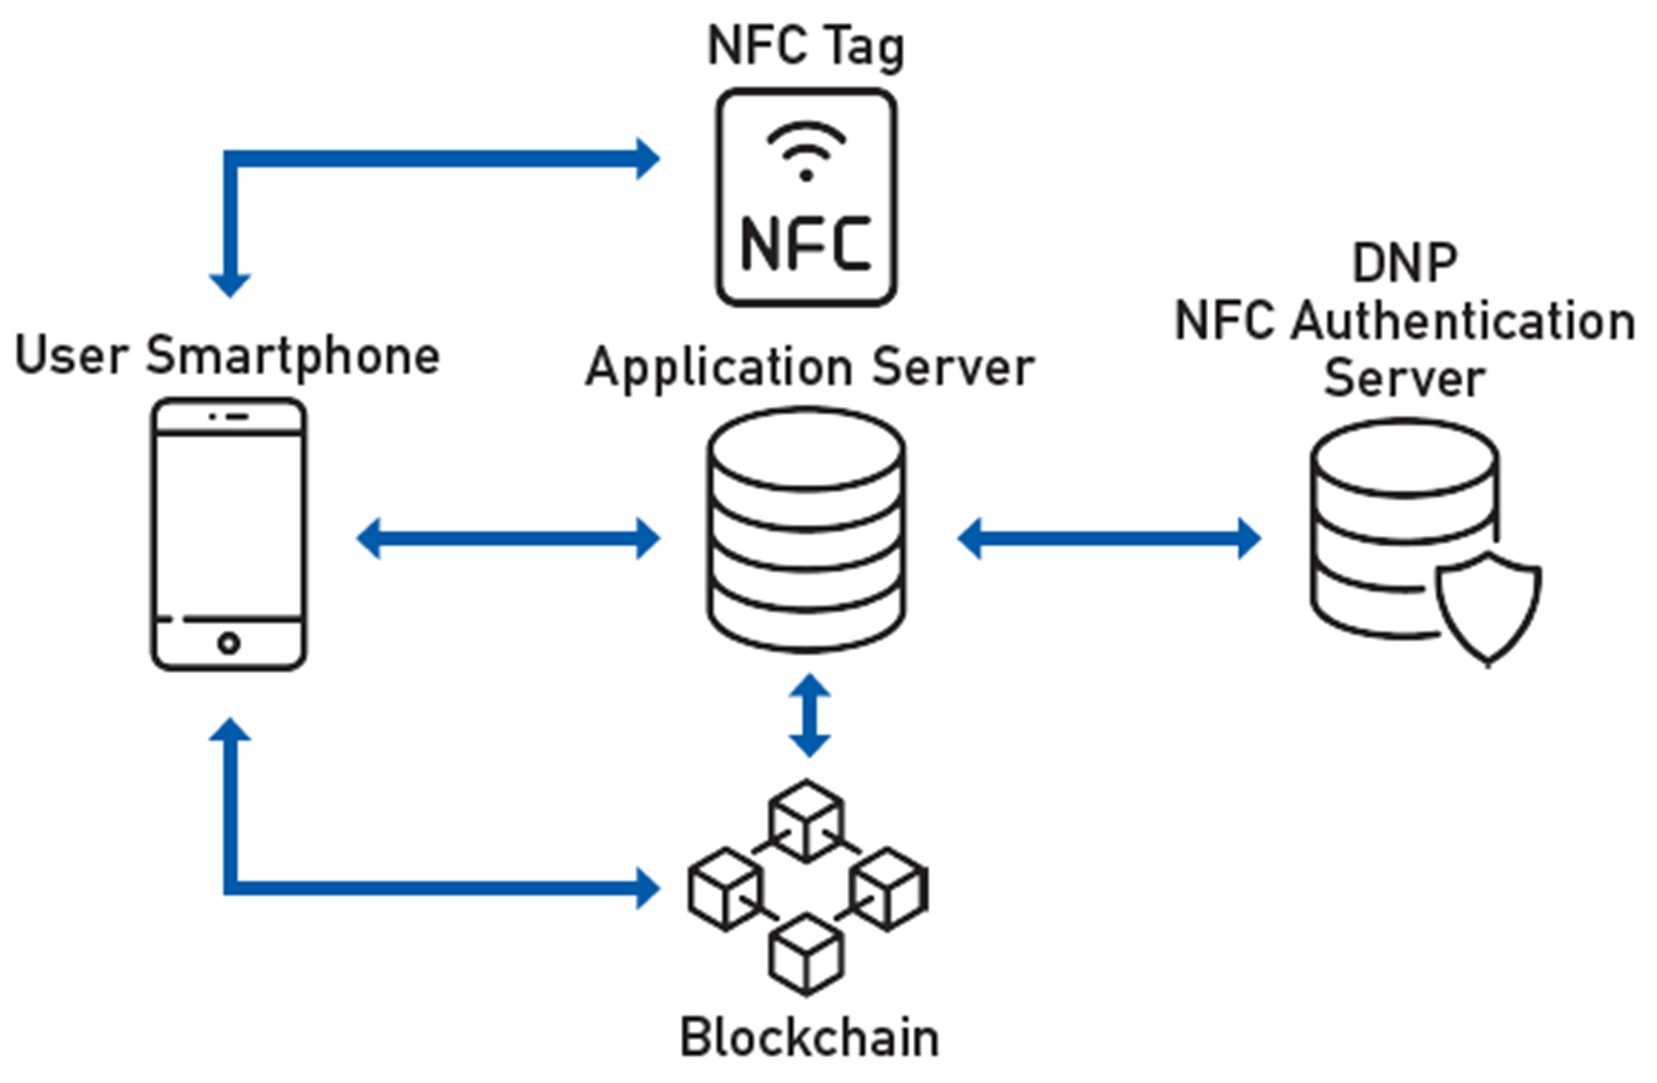 NFC tag management platform ixkio adds support for NFT authentication to  create digital twins • NFCW